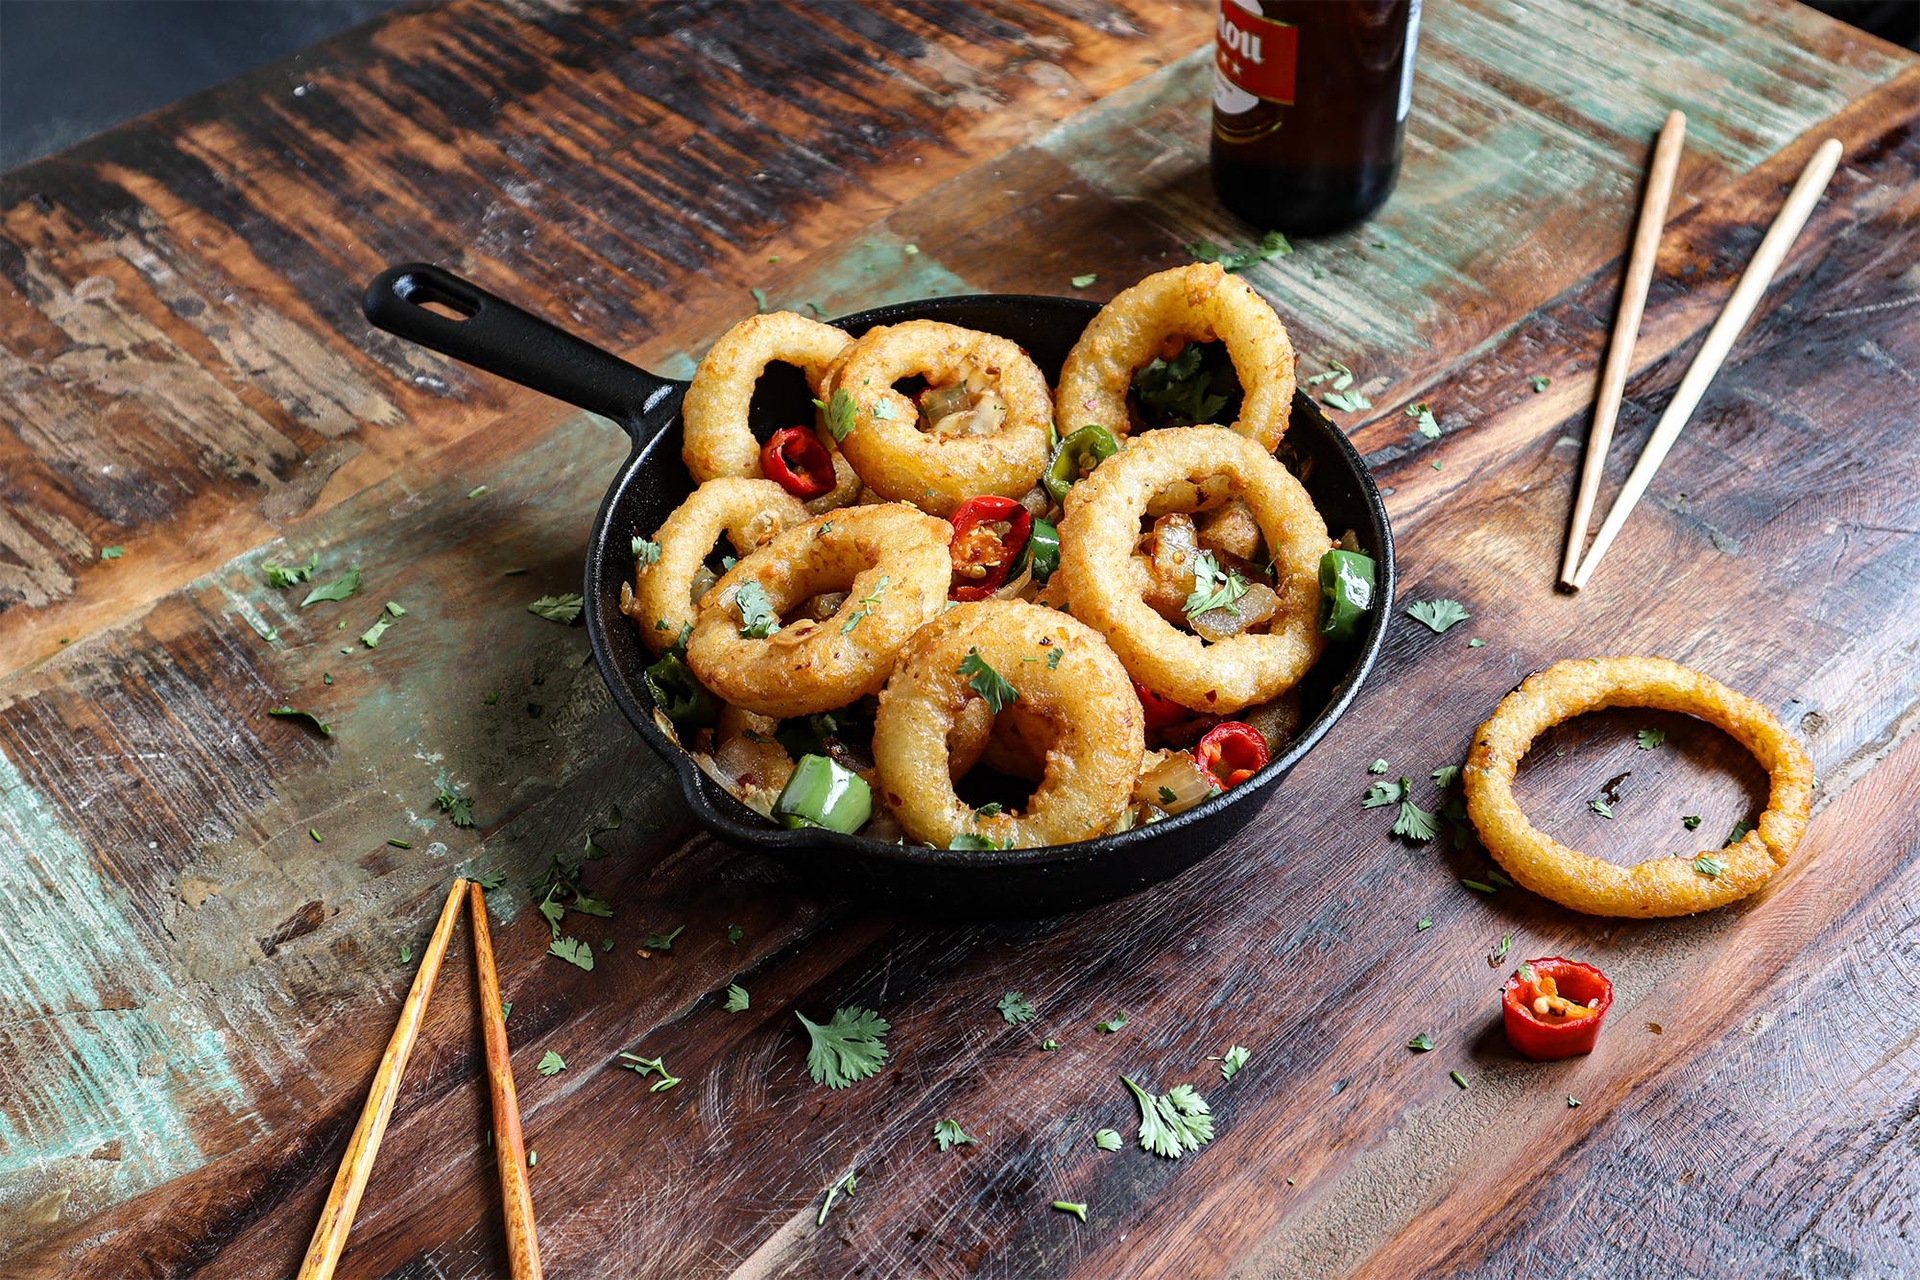 Salt and Pepper Onion Rings